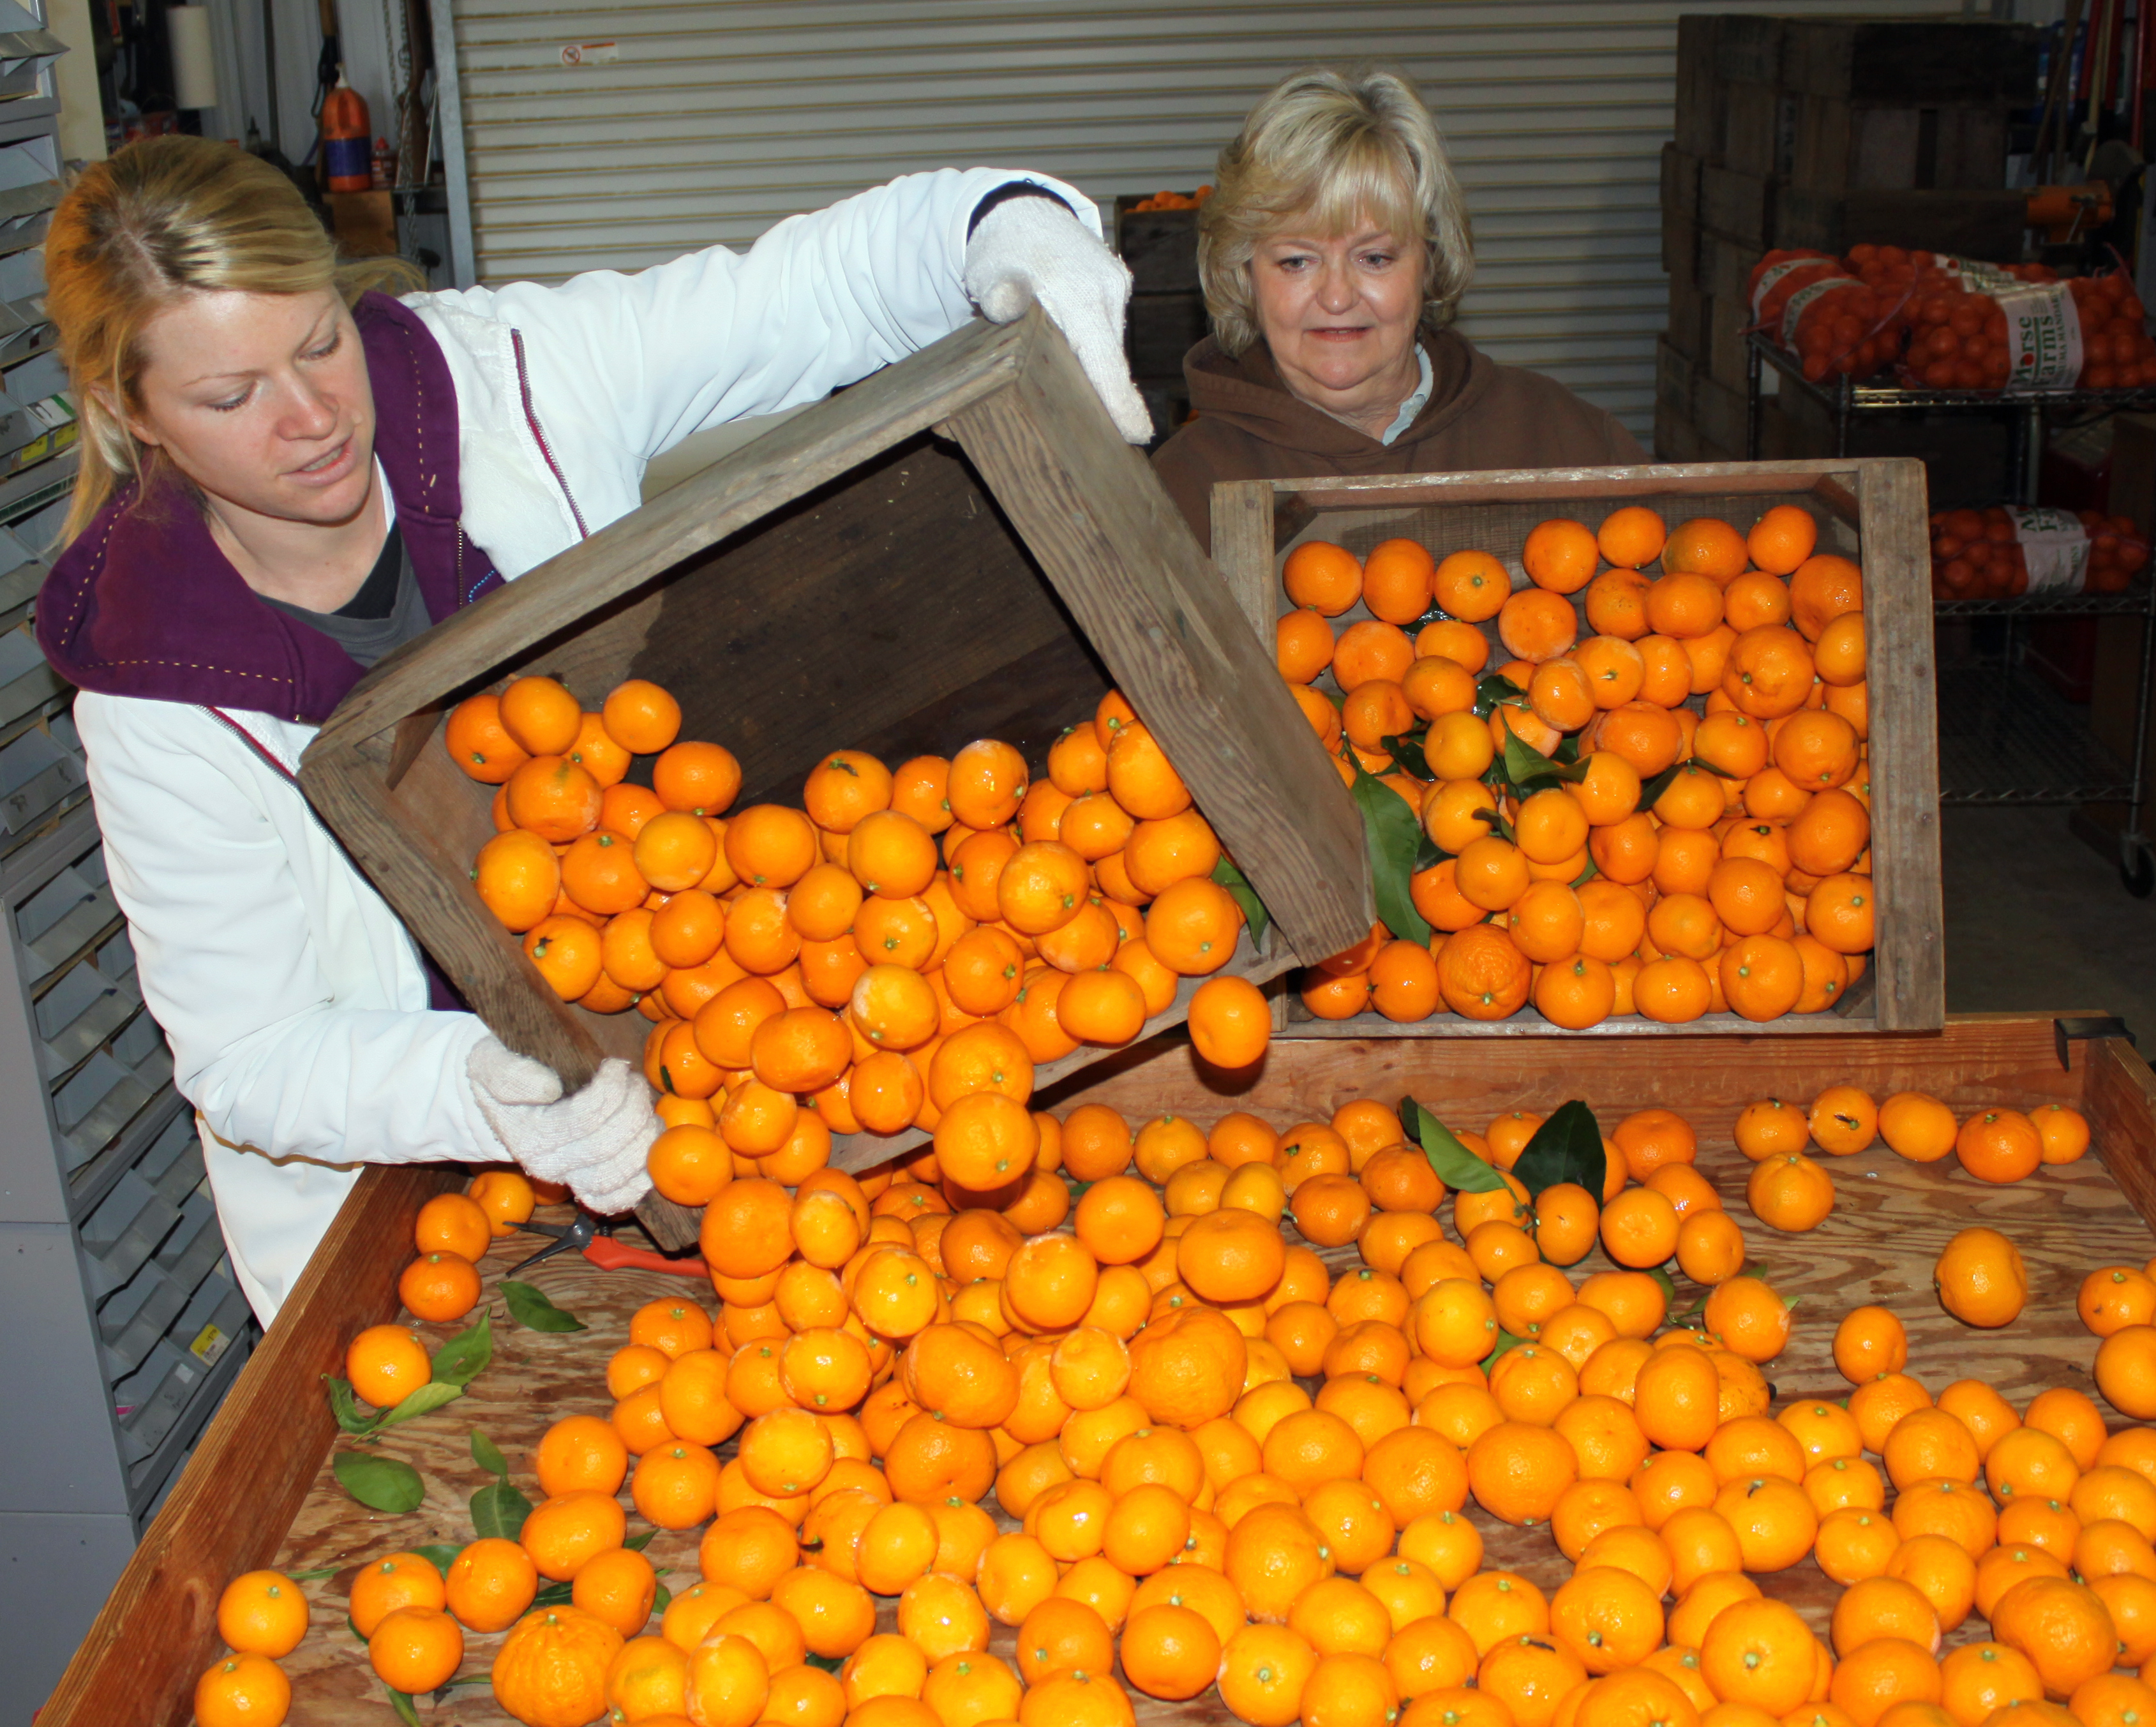 Kimberly Reese and Glennda Morse unload a couple of crates of mandarins onto the cleaning and sorting station